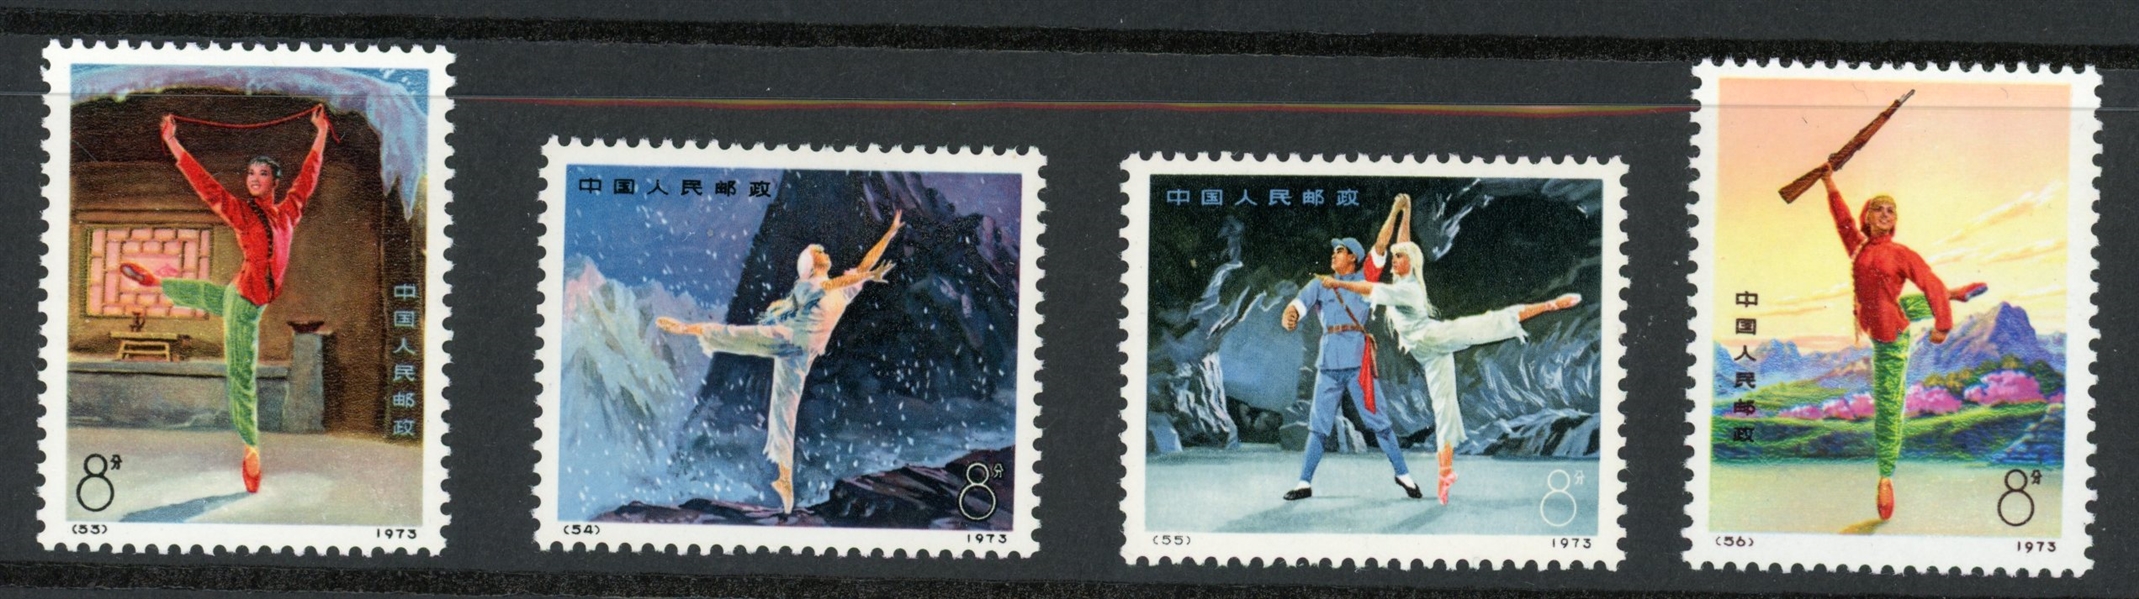 People's Republic of China Scott 1126-1129 MH Complete Set (SCV $175)